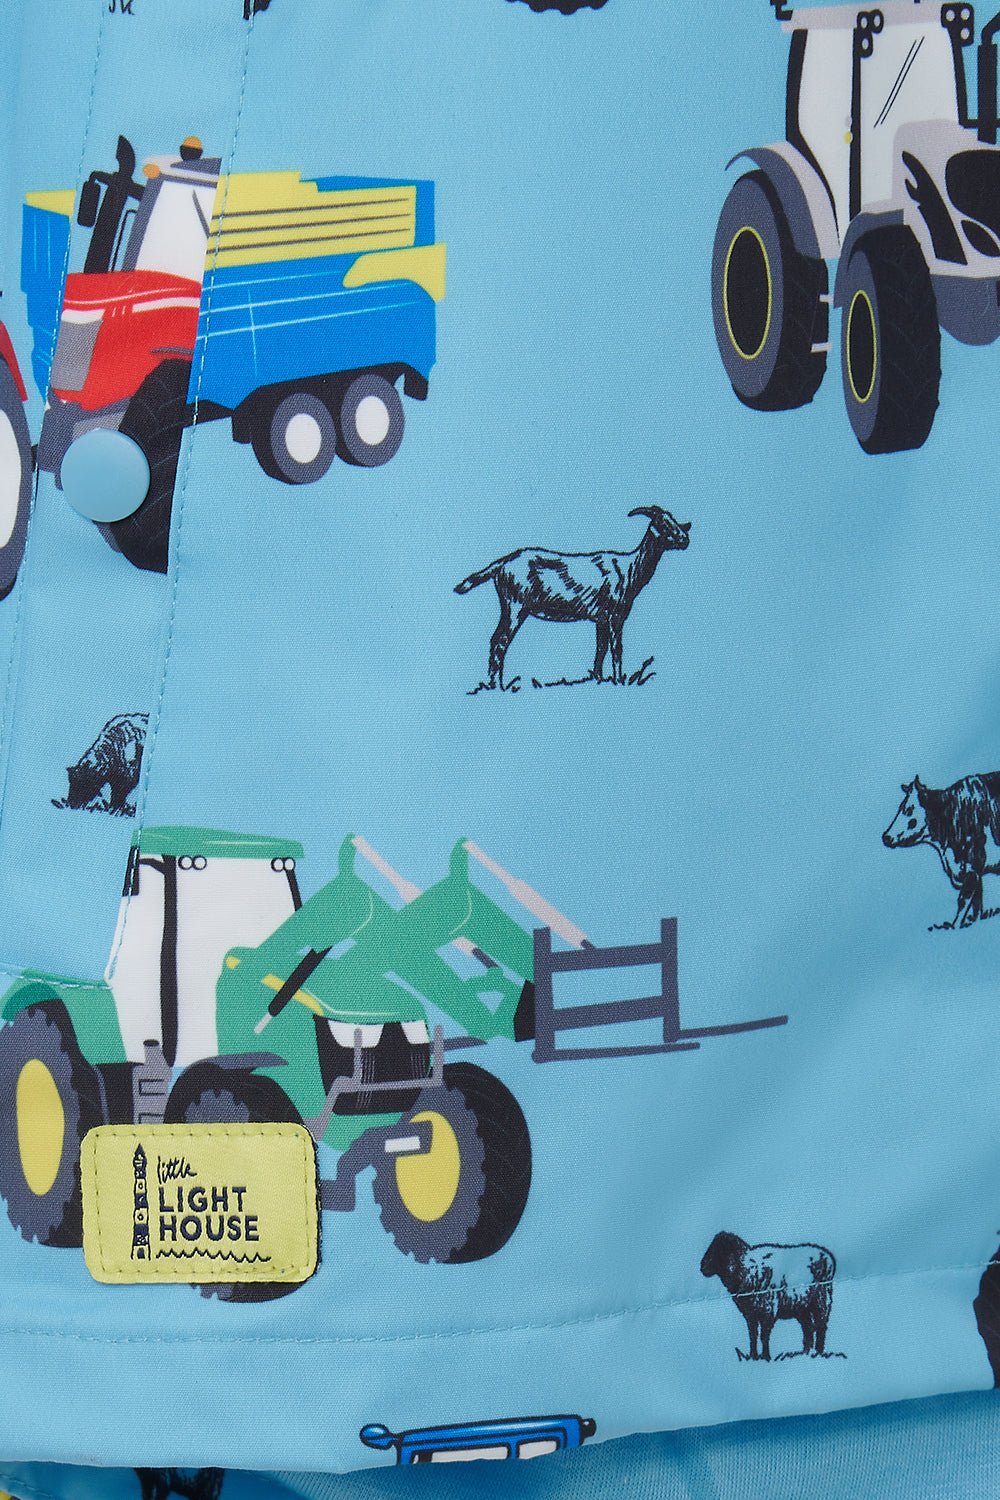 Ethan Jacket - Blue Tractor Print-Lighthouse